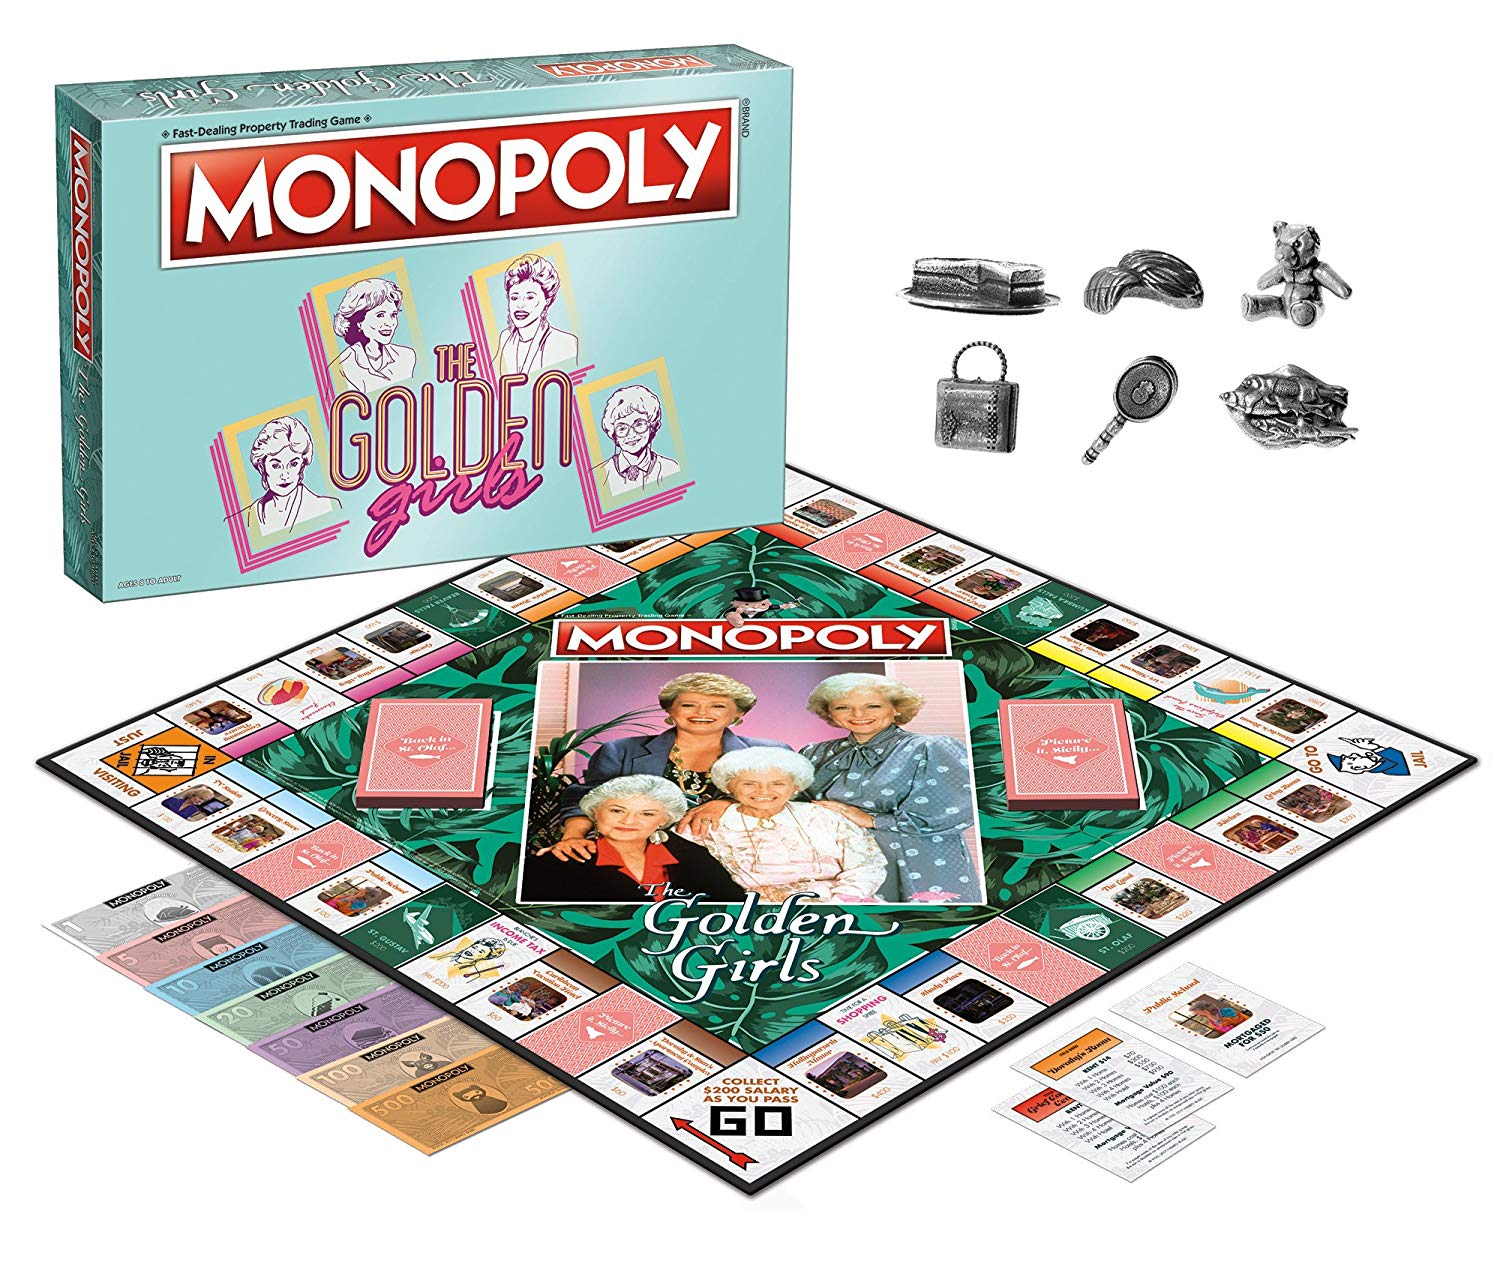 themed monopoly set